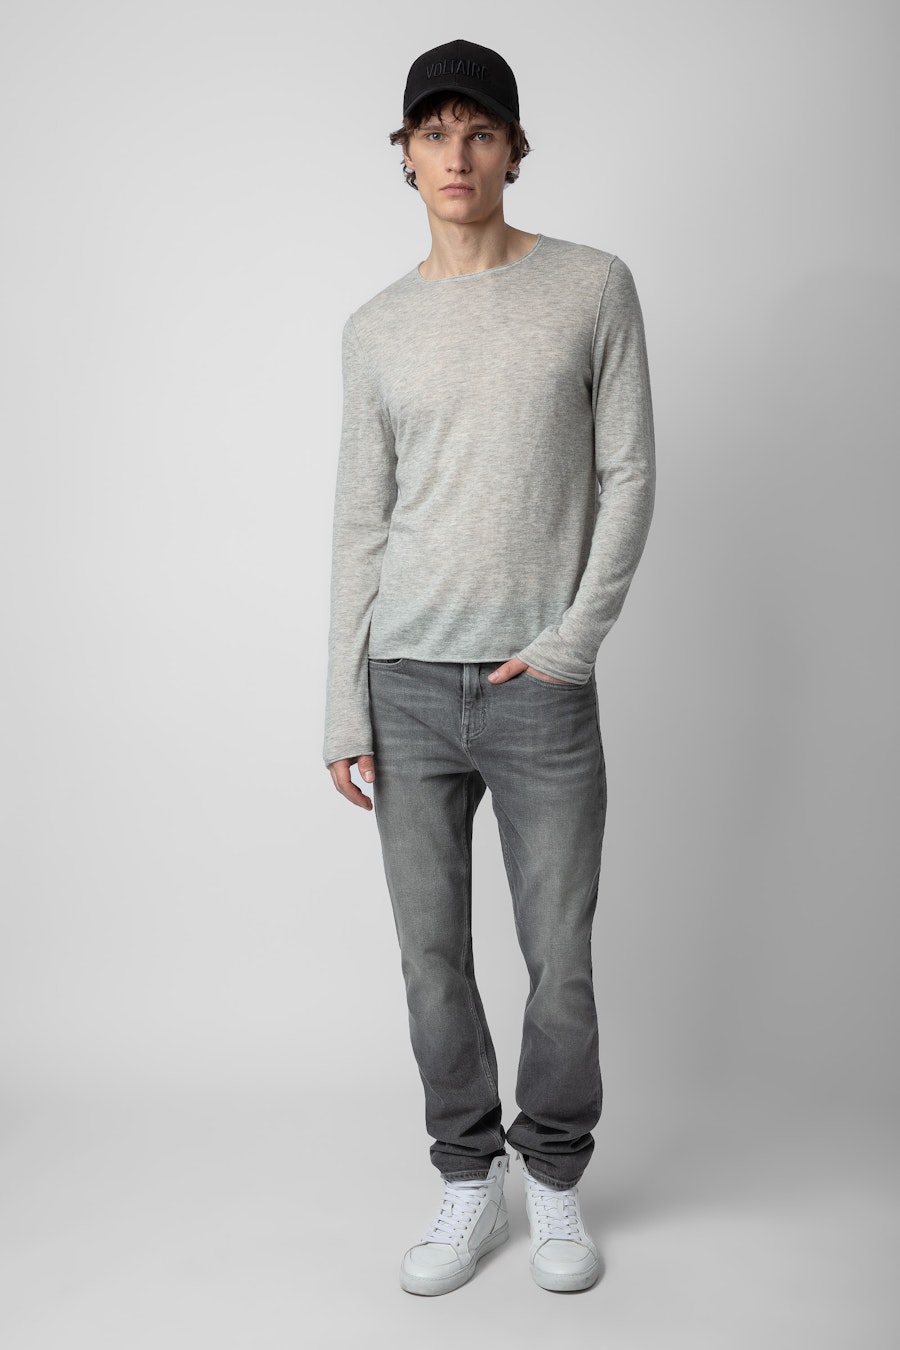 ZADIG&VOLTAIRE Teiss Cashmere Sweater,Light grey